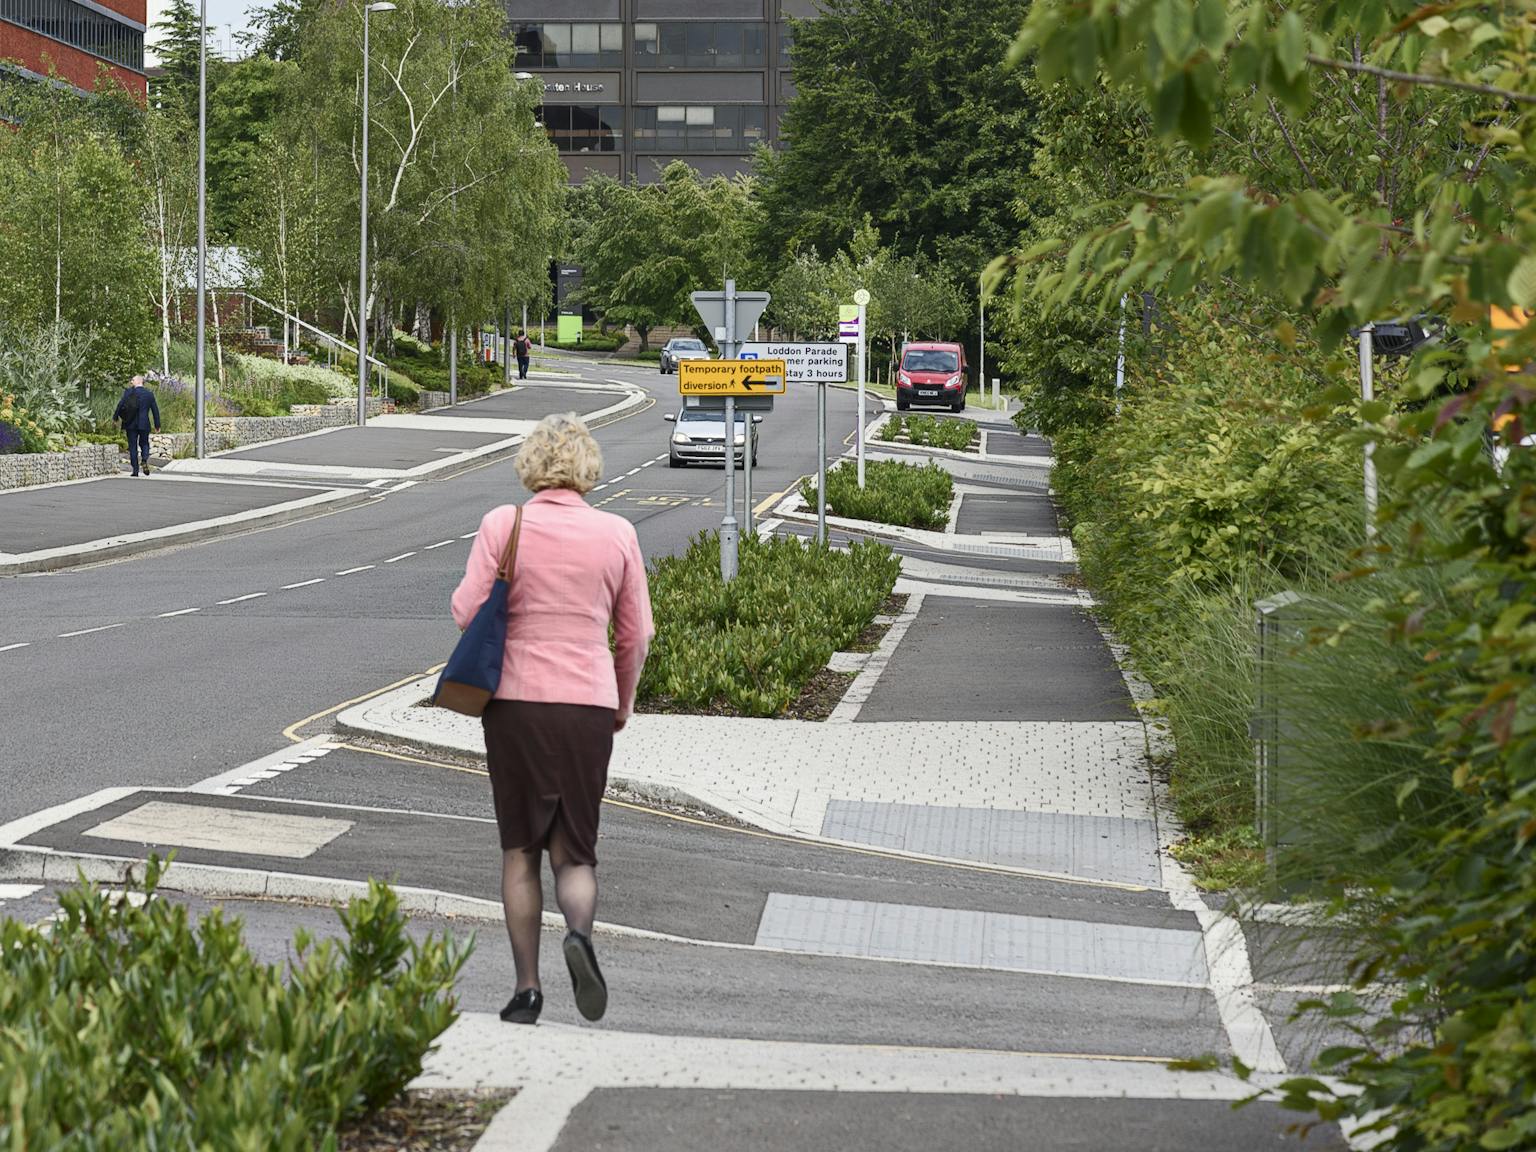 Road, plant beds and a person walking